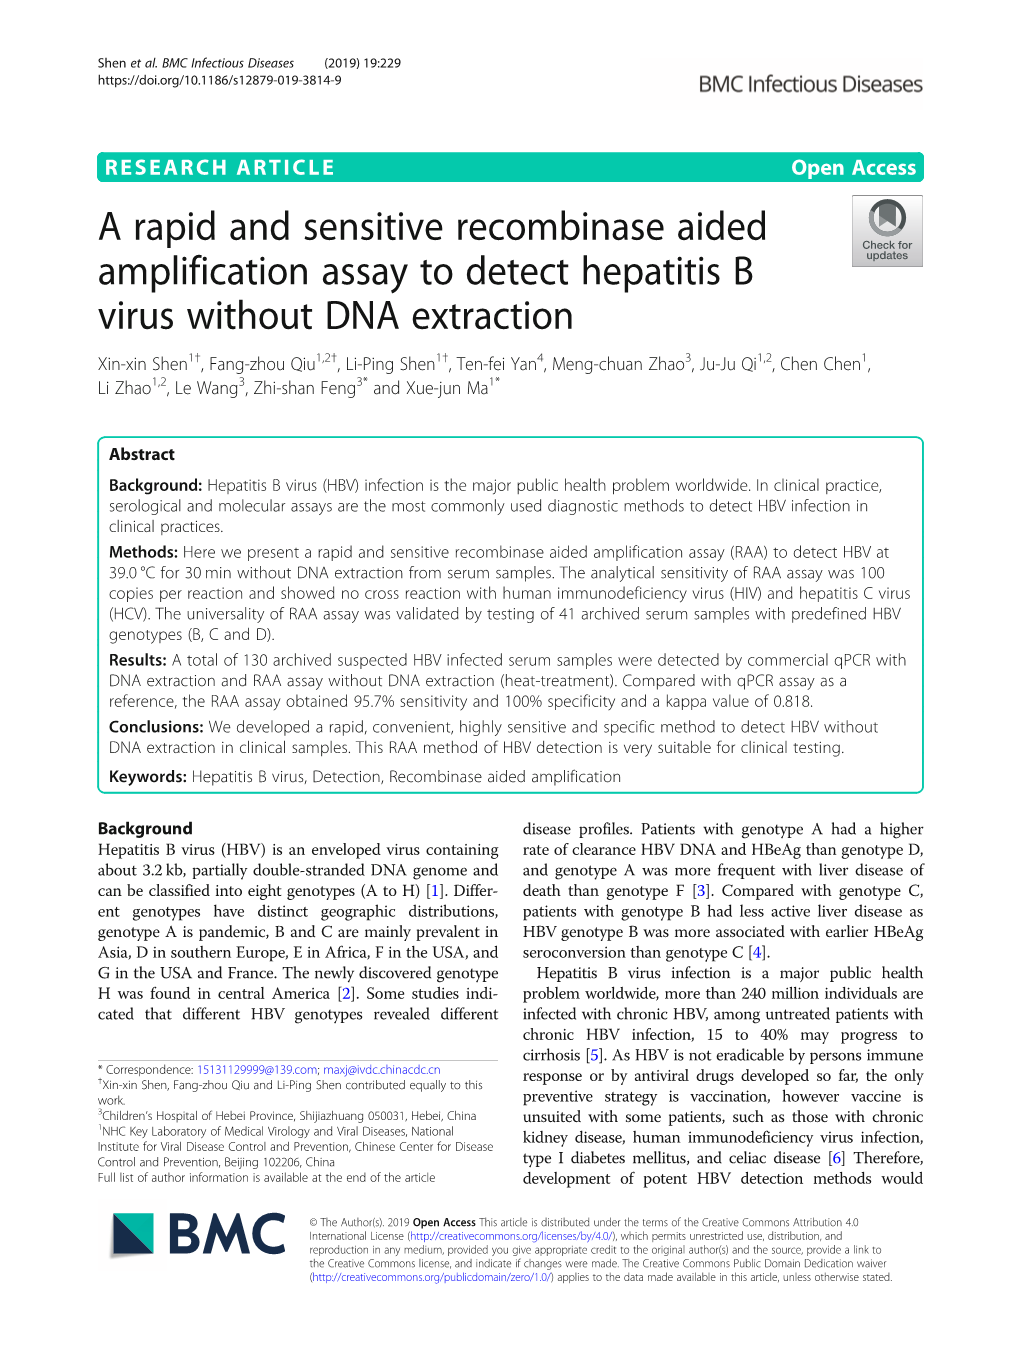 A Rapid and Sensitive Recombinase Aided Amplification Assay to Detect